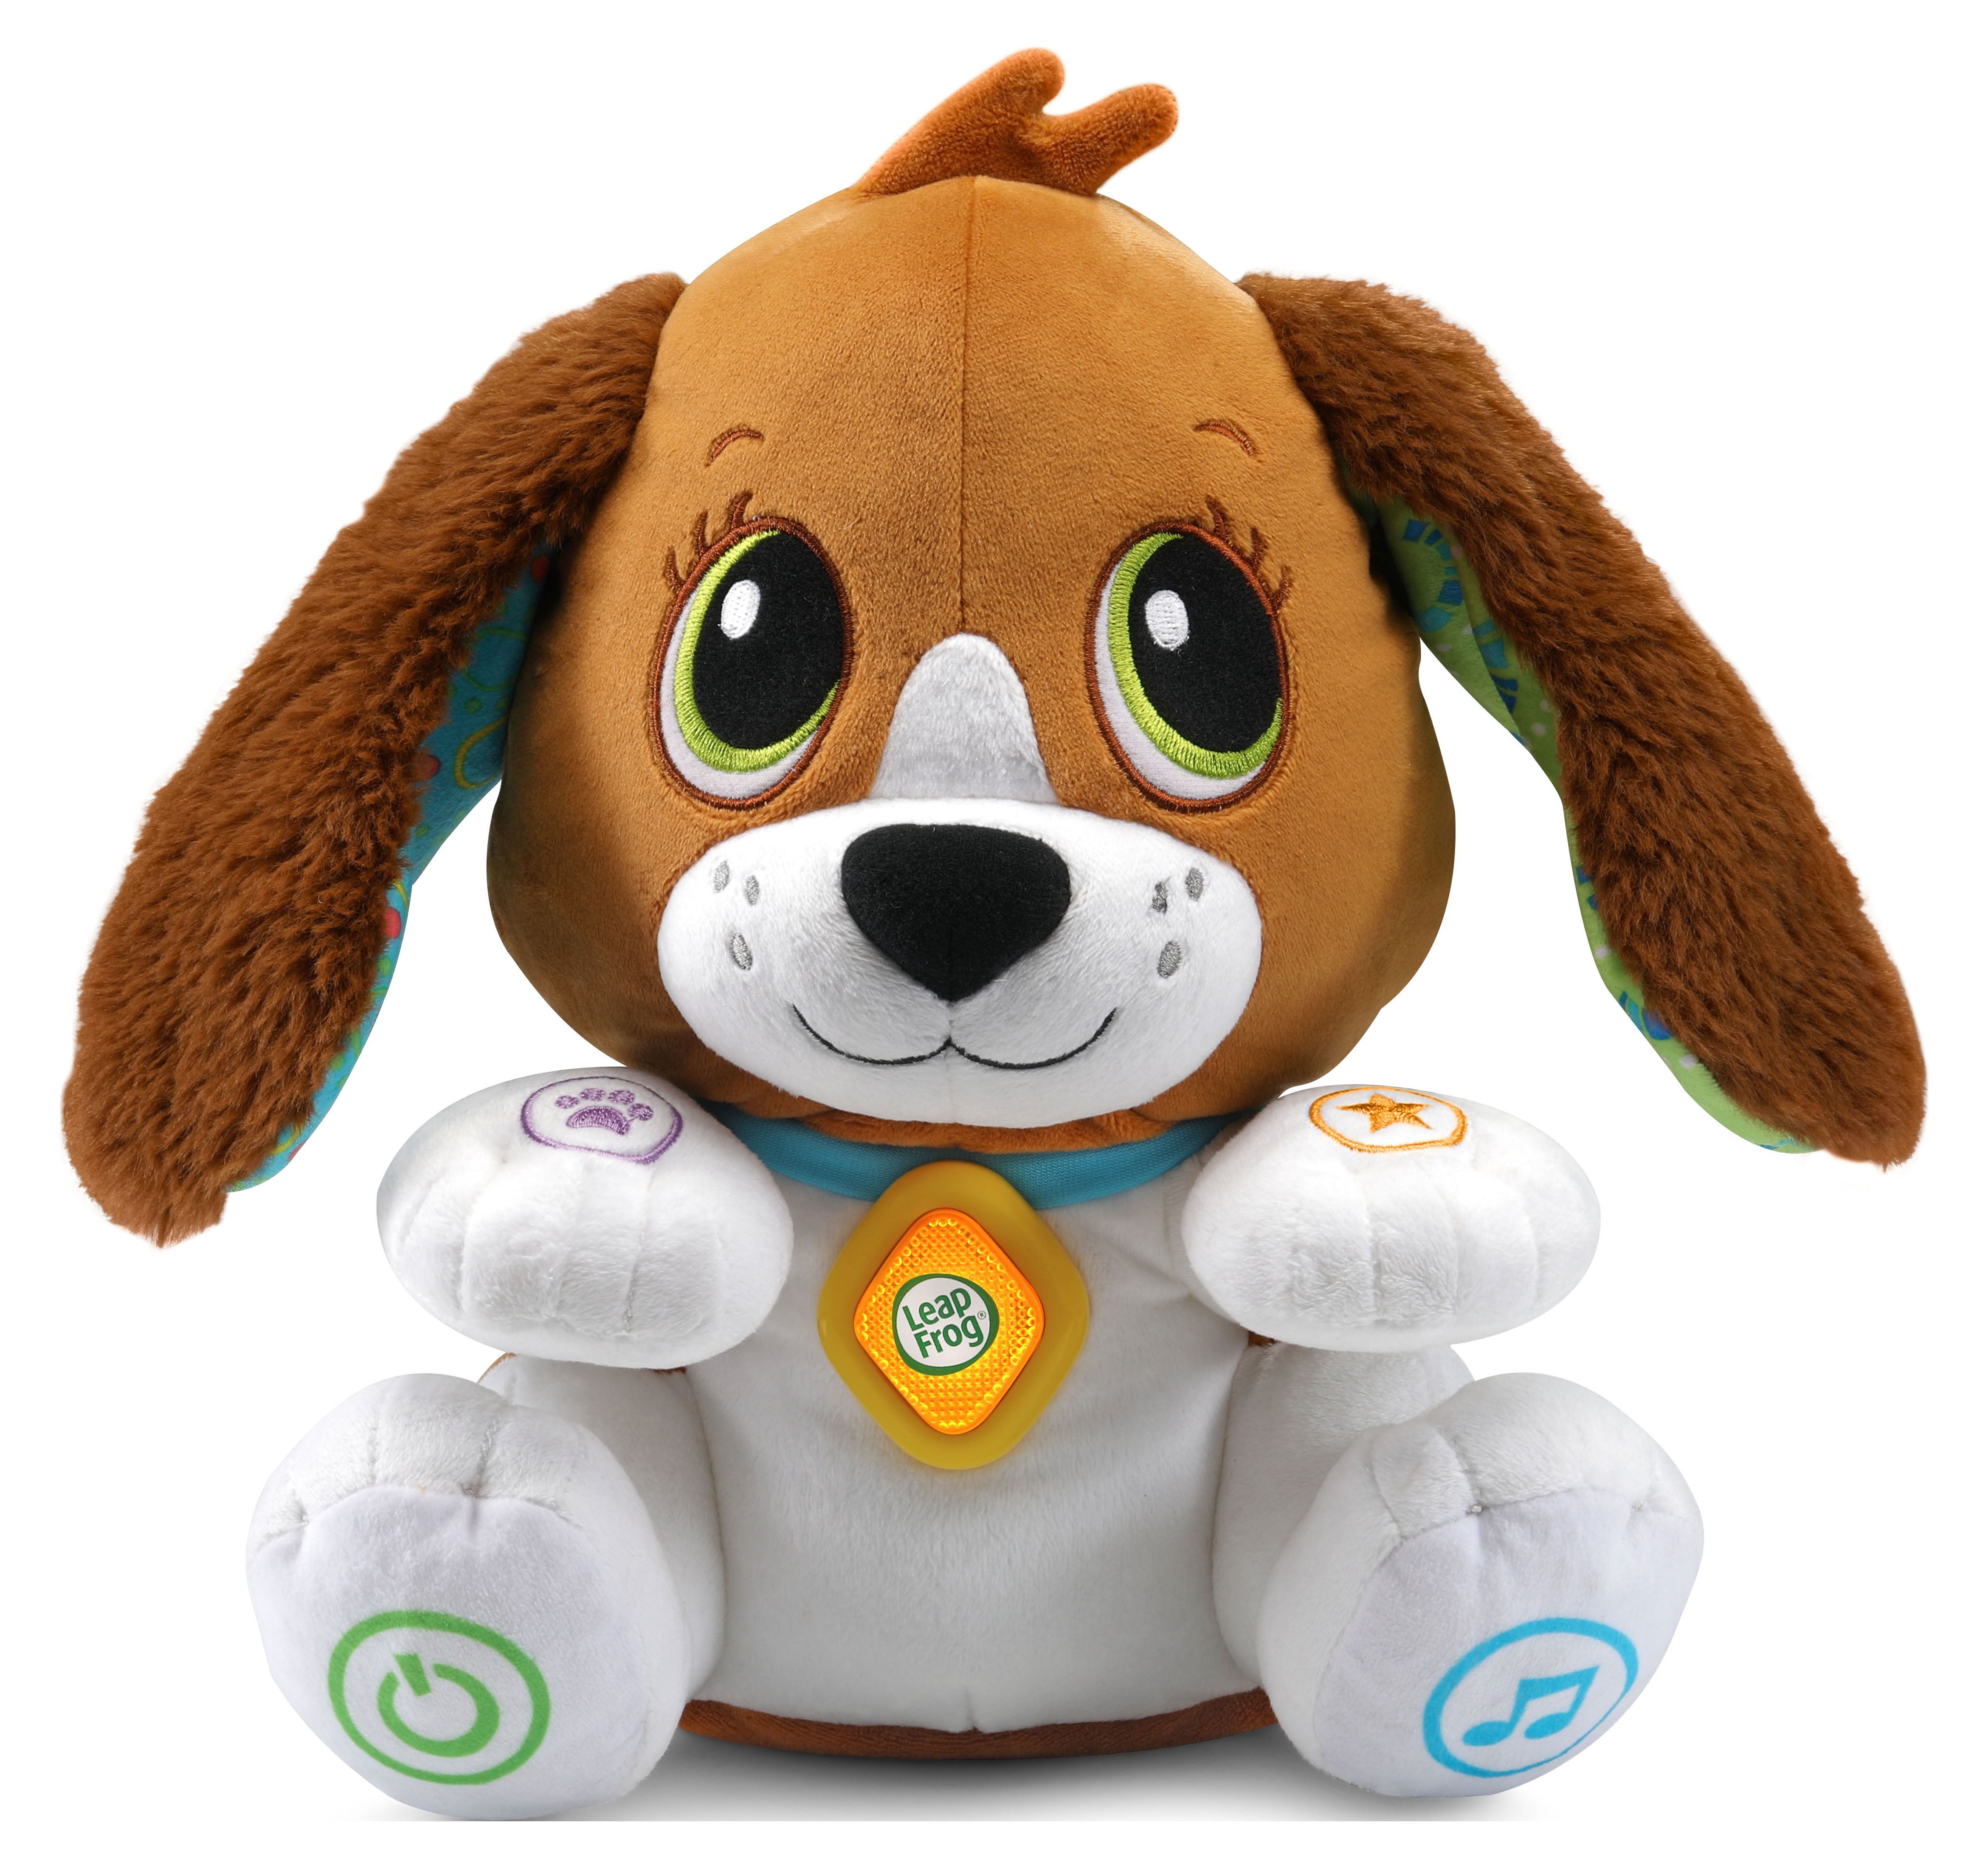 LeapFrog® Speak & Learn Puppy, Plush Dog with Talk-Back Feature - image 1 of 11